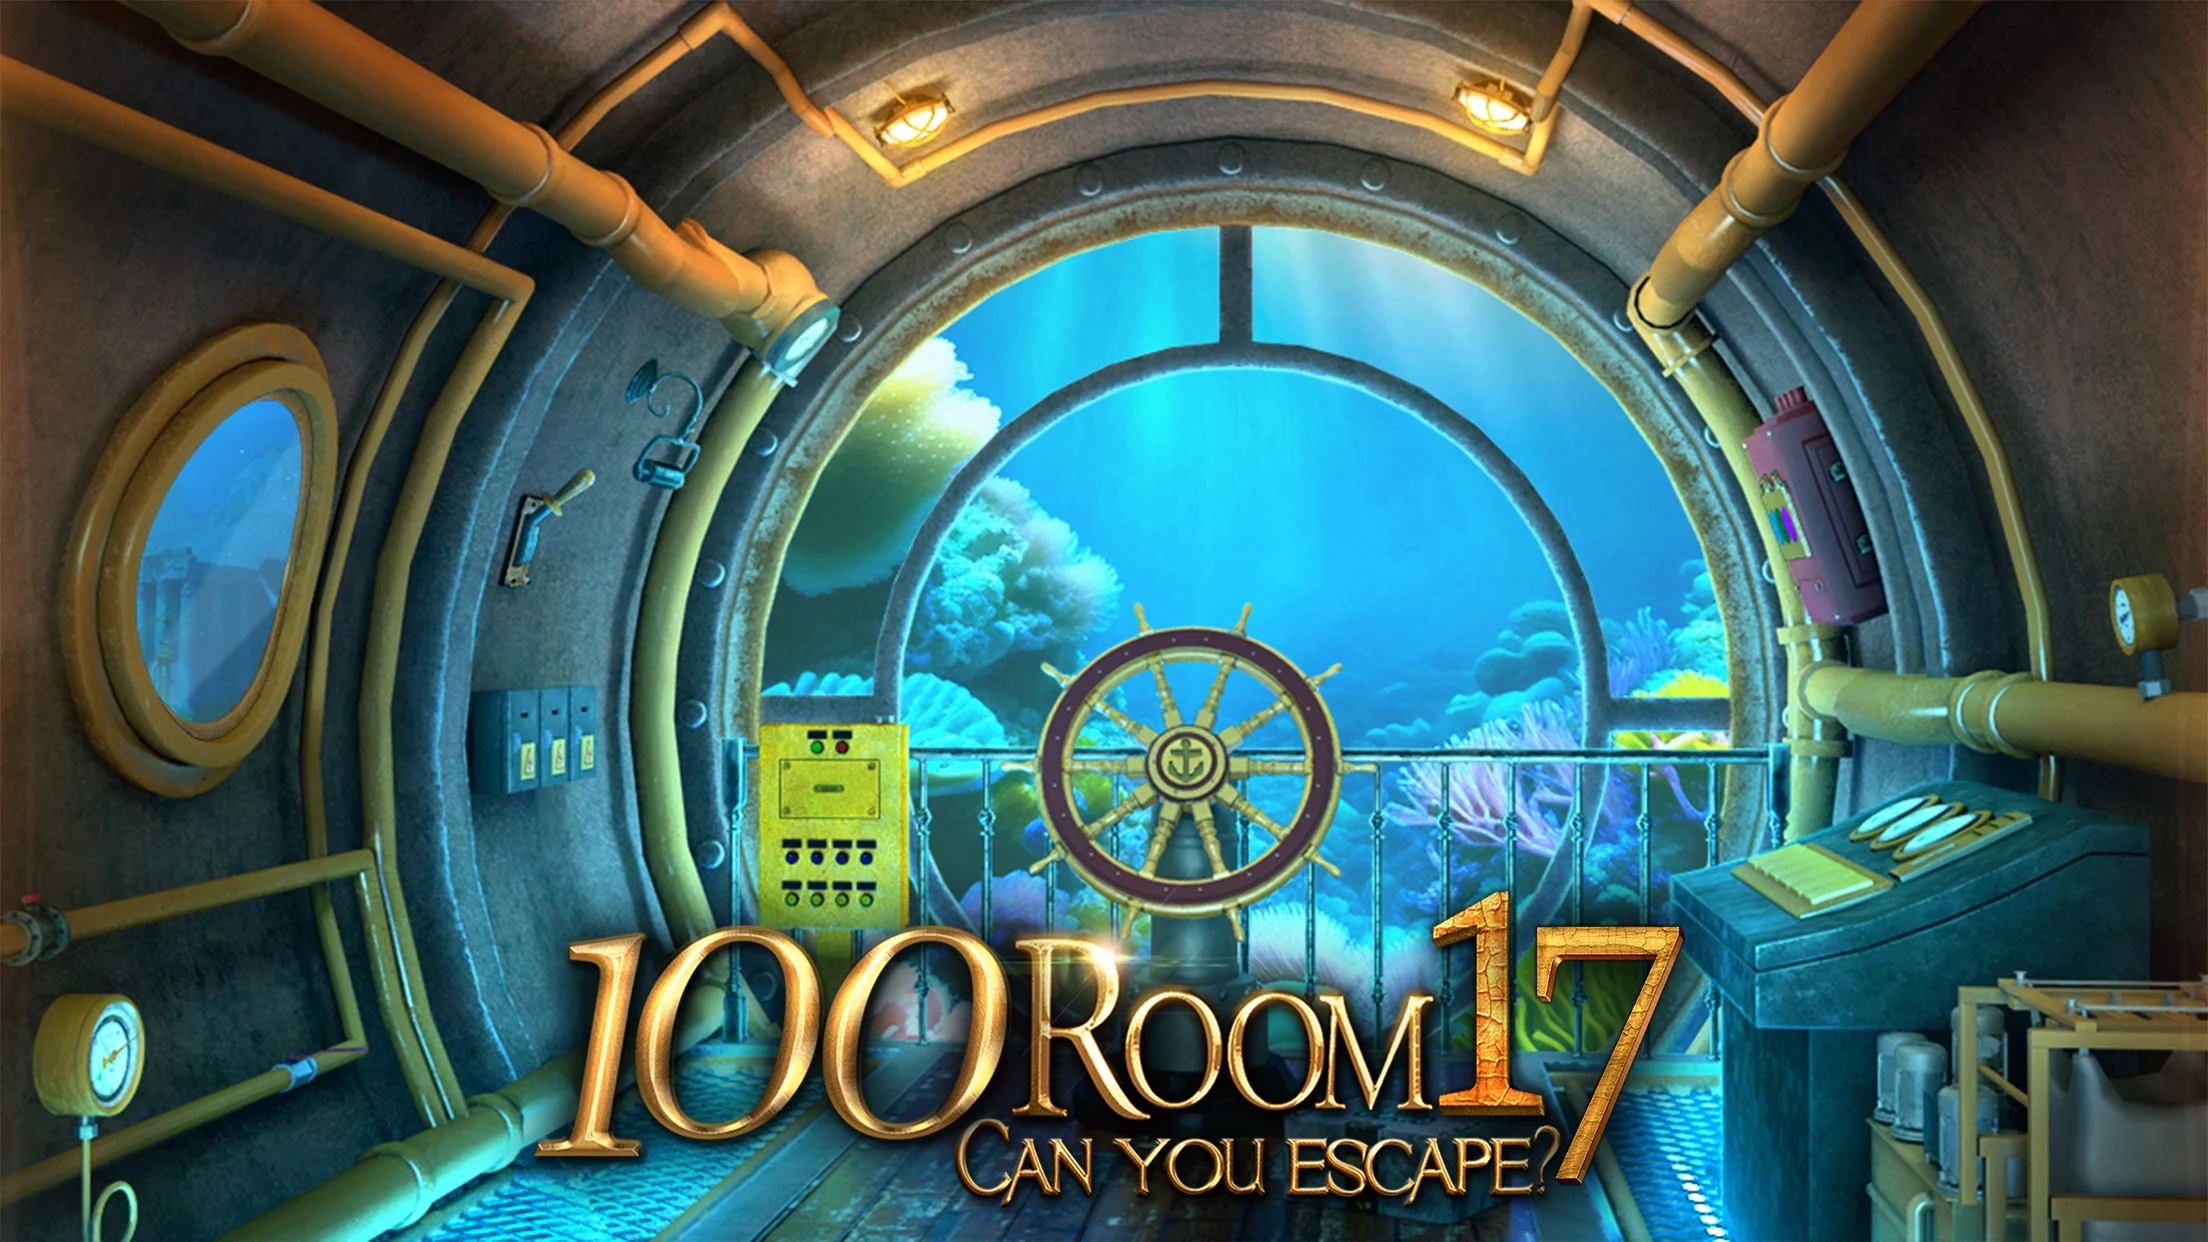 Can you escape the 100 room XVII(Unlimited Hints)